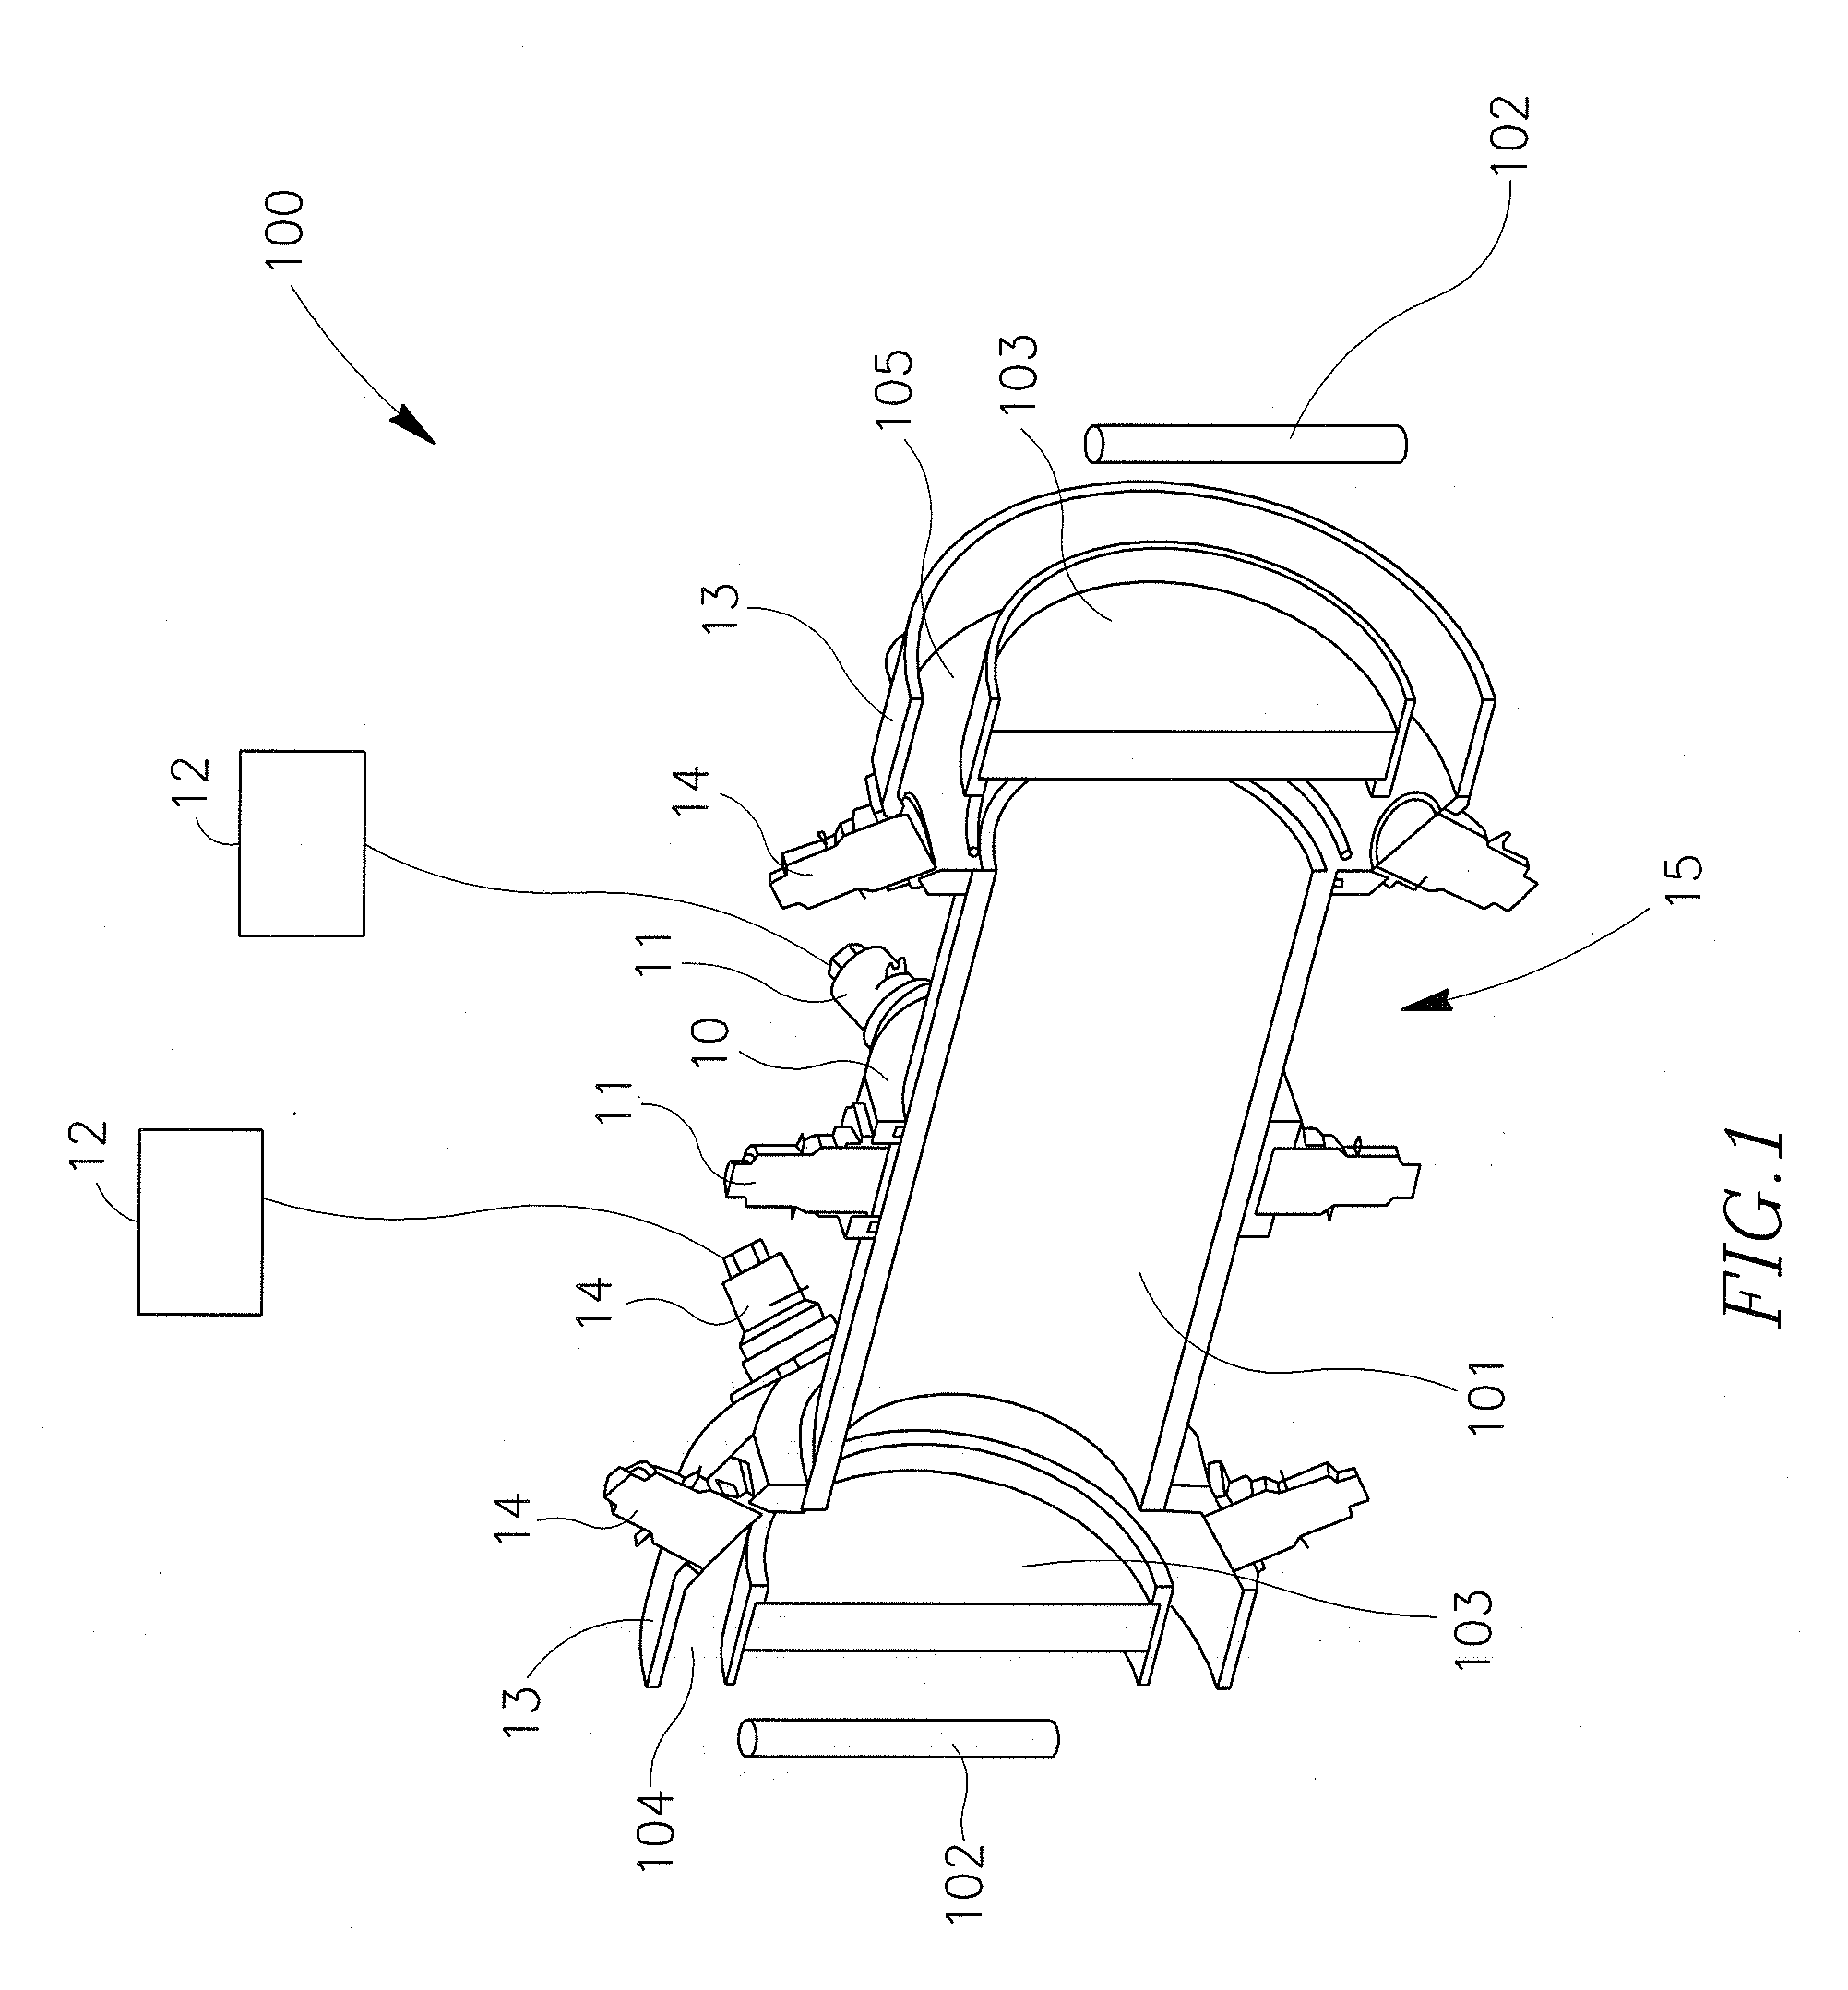 System and method for ultrasonic cleaning of ultraviolet disinfection system